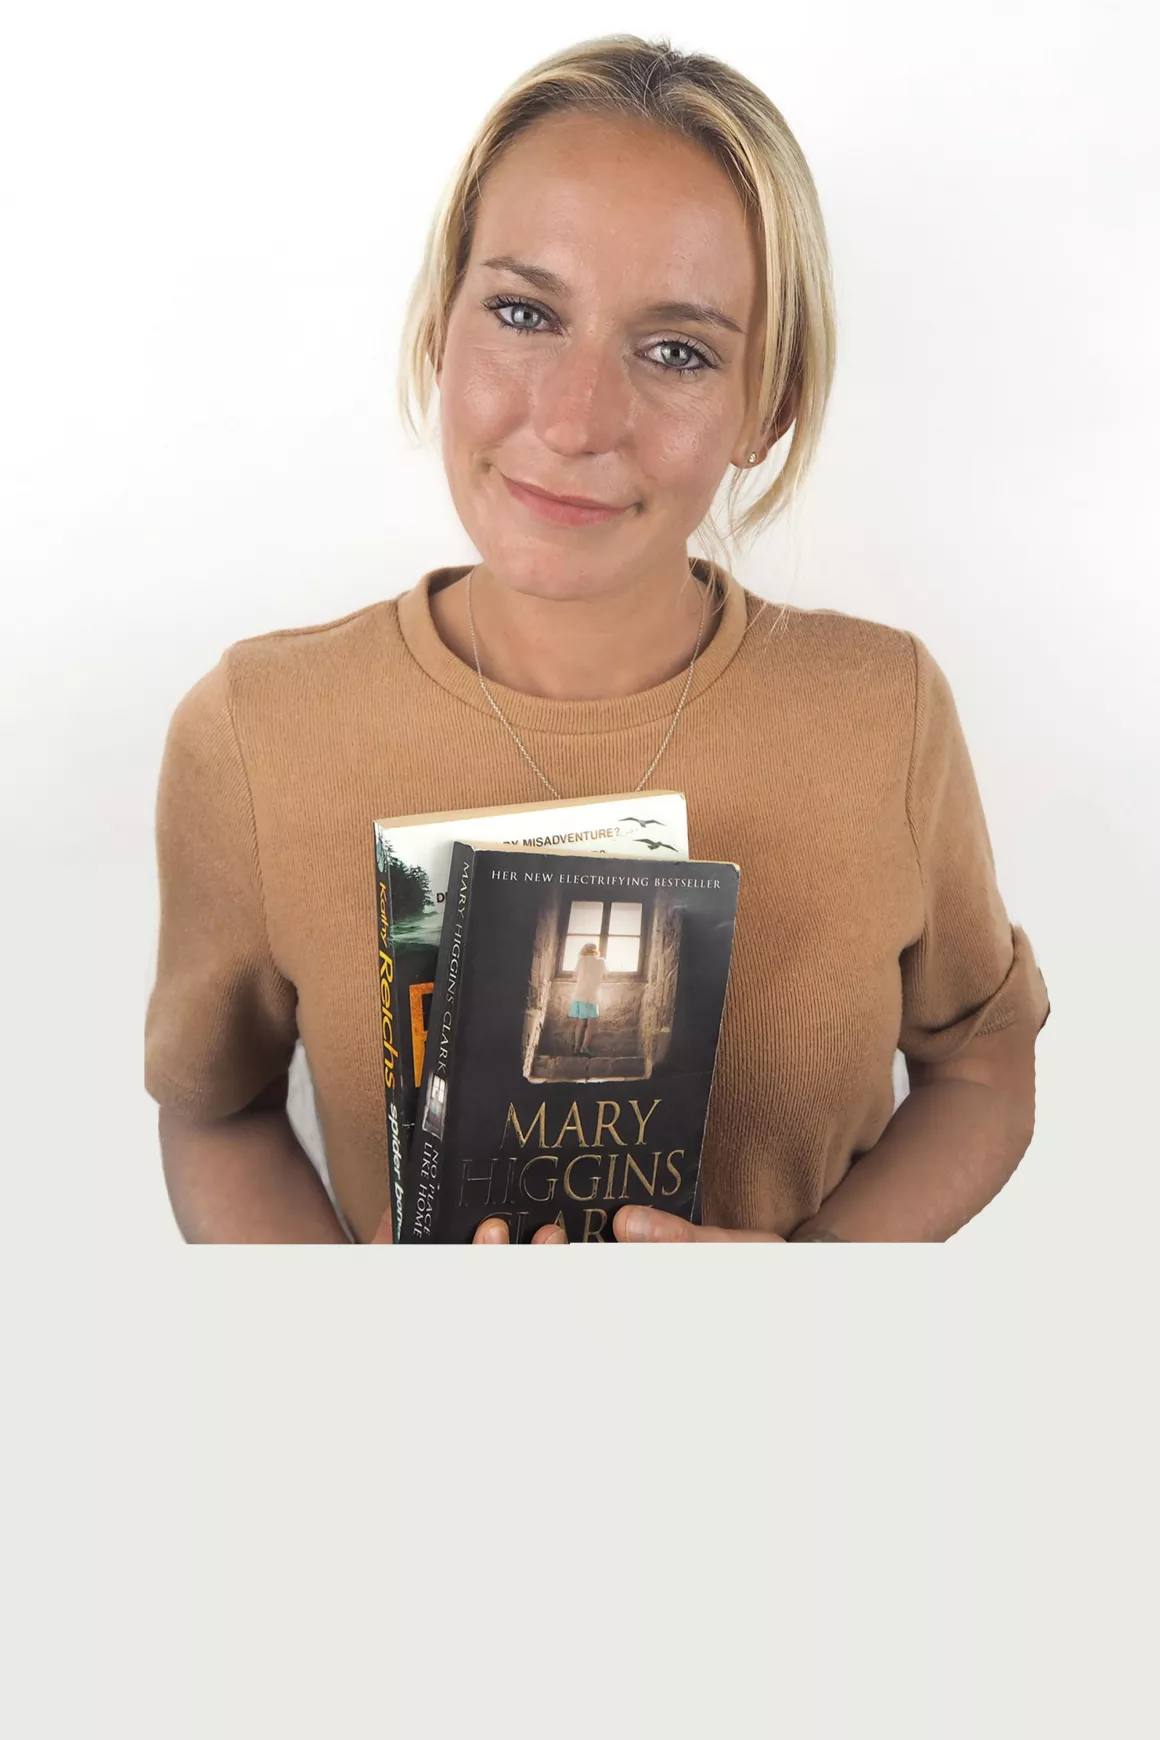 Nikita White (Recruitment Consultant) holding books in hand, wearing a mustard top, photo taken with white background 2